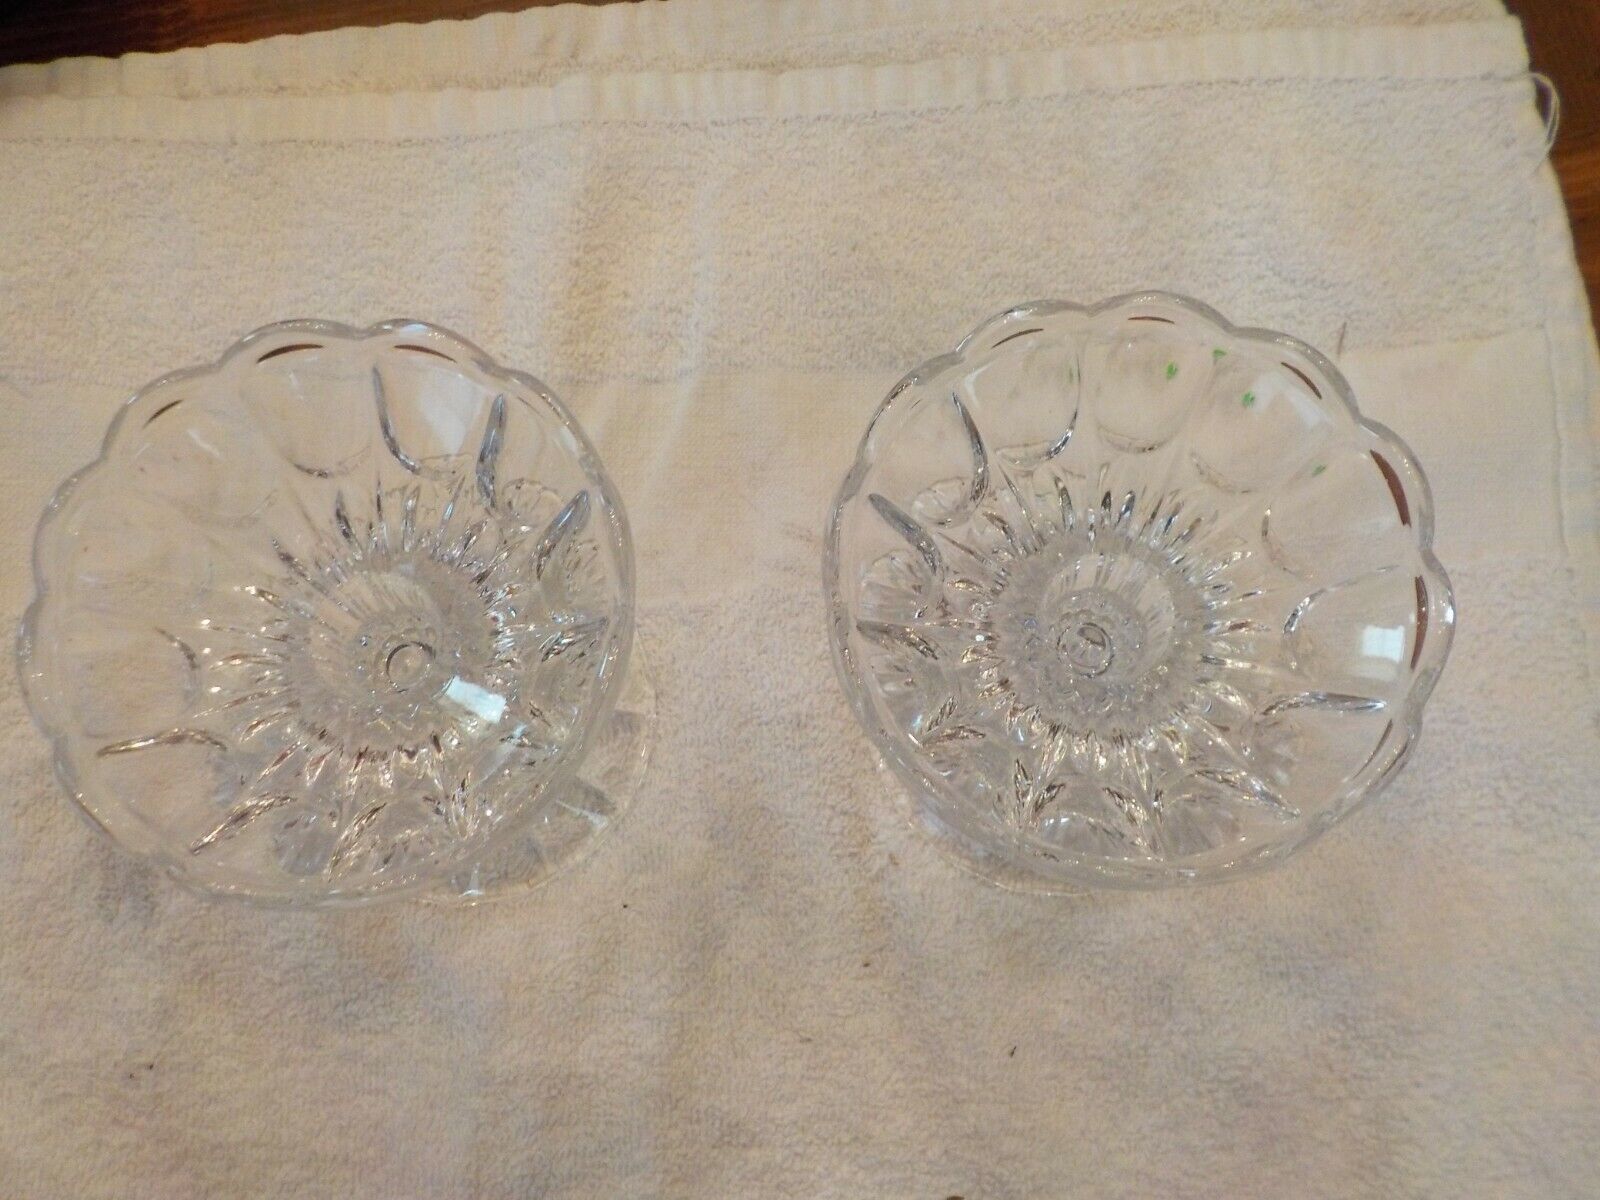 SET OF GLASS CANDLE HOLDER ITEM NO. GCH2